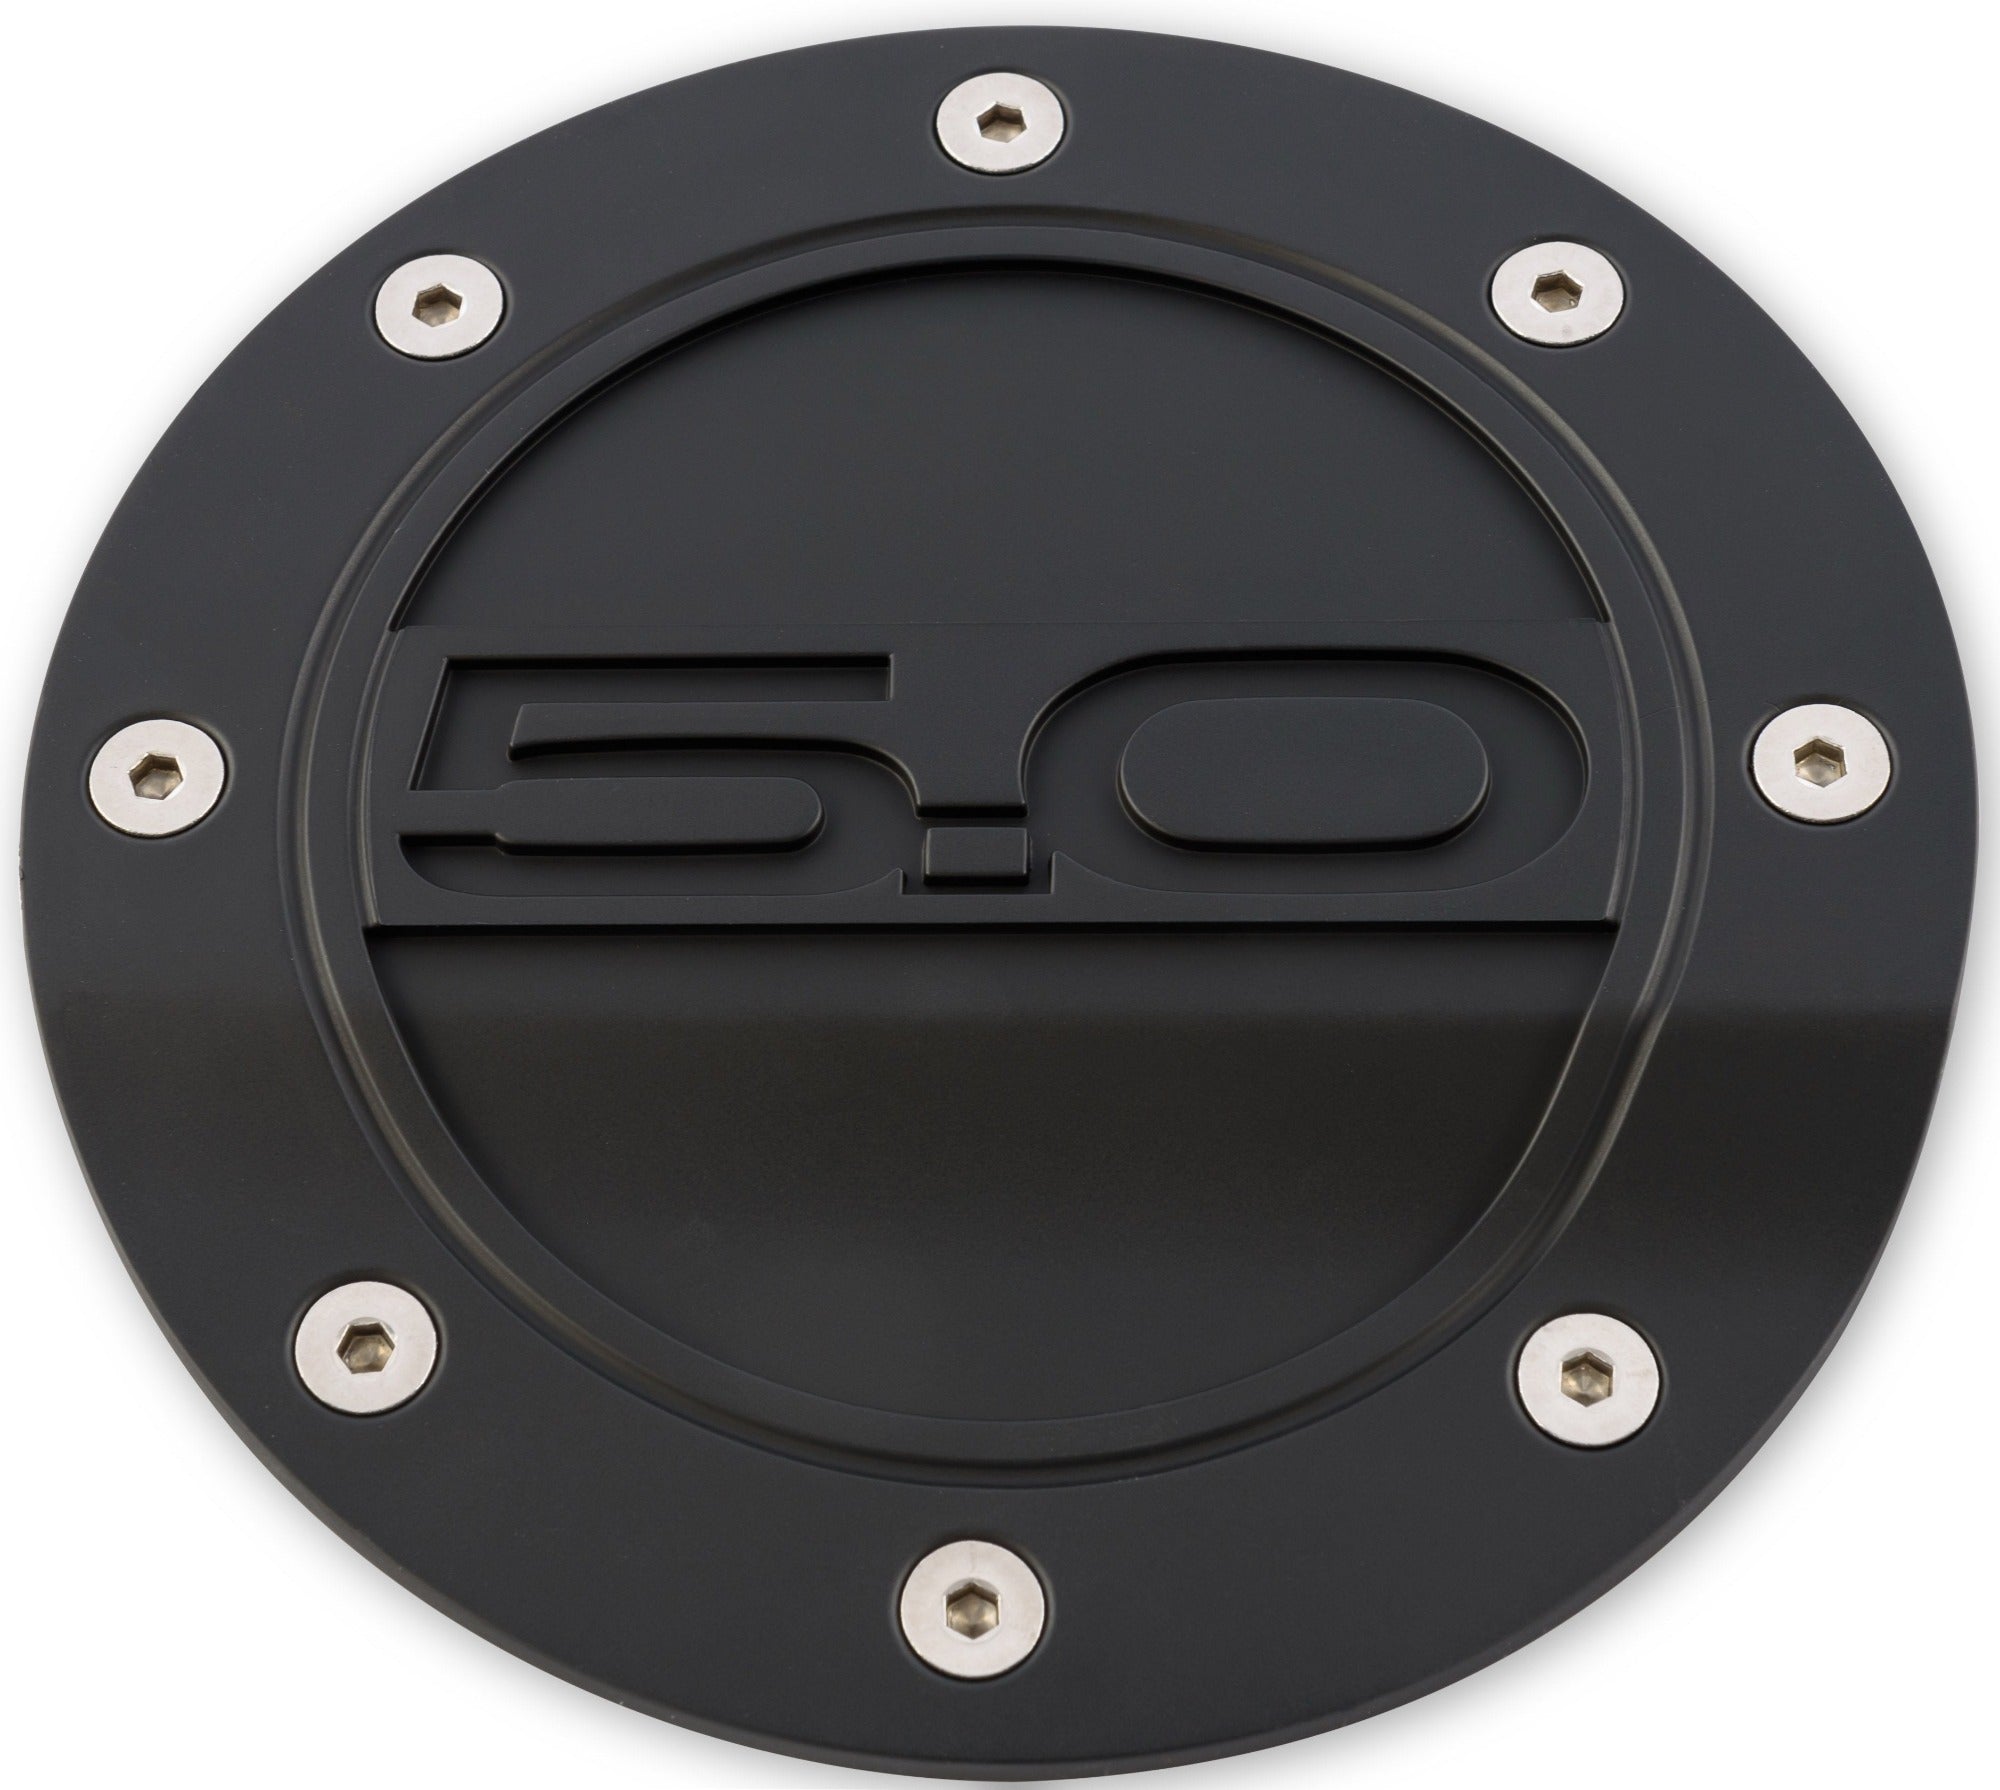 DRAKE Fuel Door (Black, feat. 5.0L Logo) for Mustang 5.0L GT 2015-23 | #FR3Z-6640526-5A - Available from NEMESISUK.COM